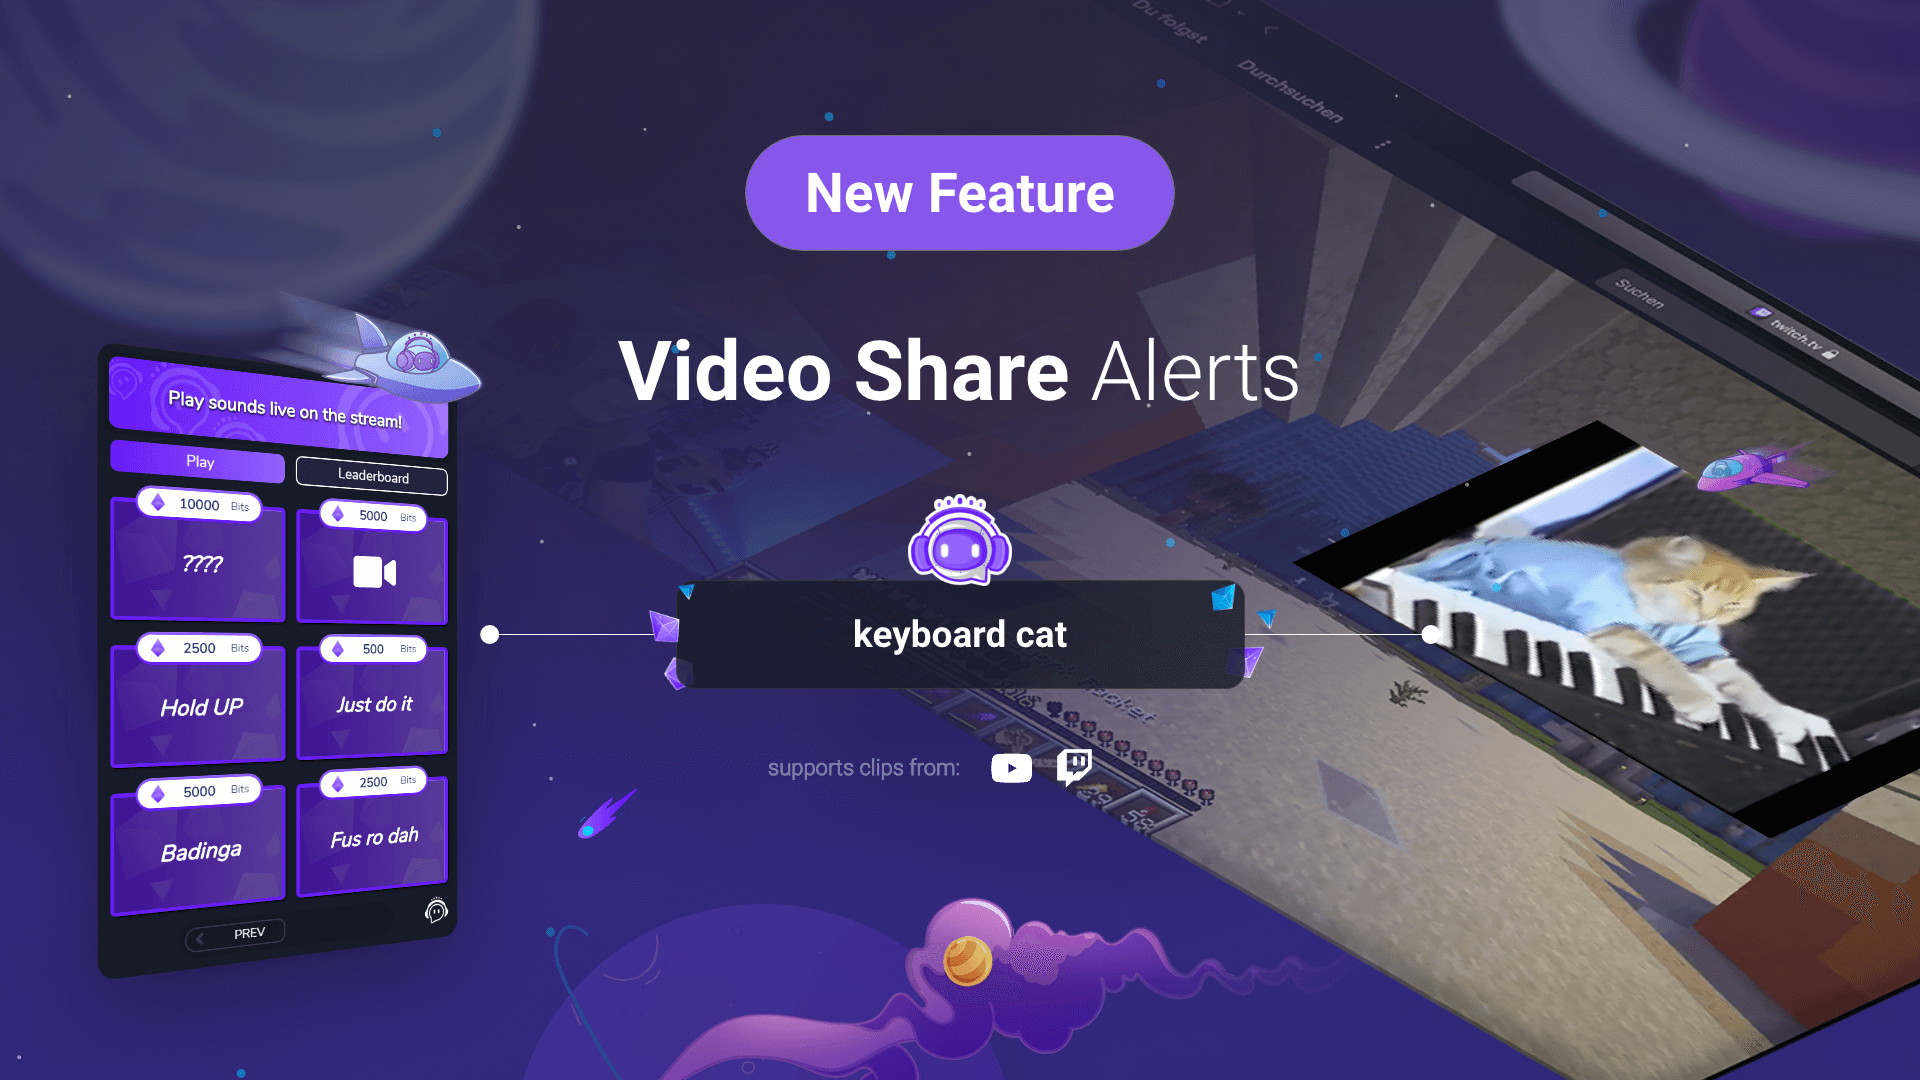 This image shows the UI of the Video Share Alerts feature of Sound Alerts on Twitch.